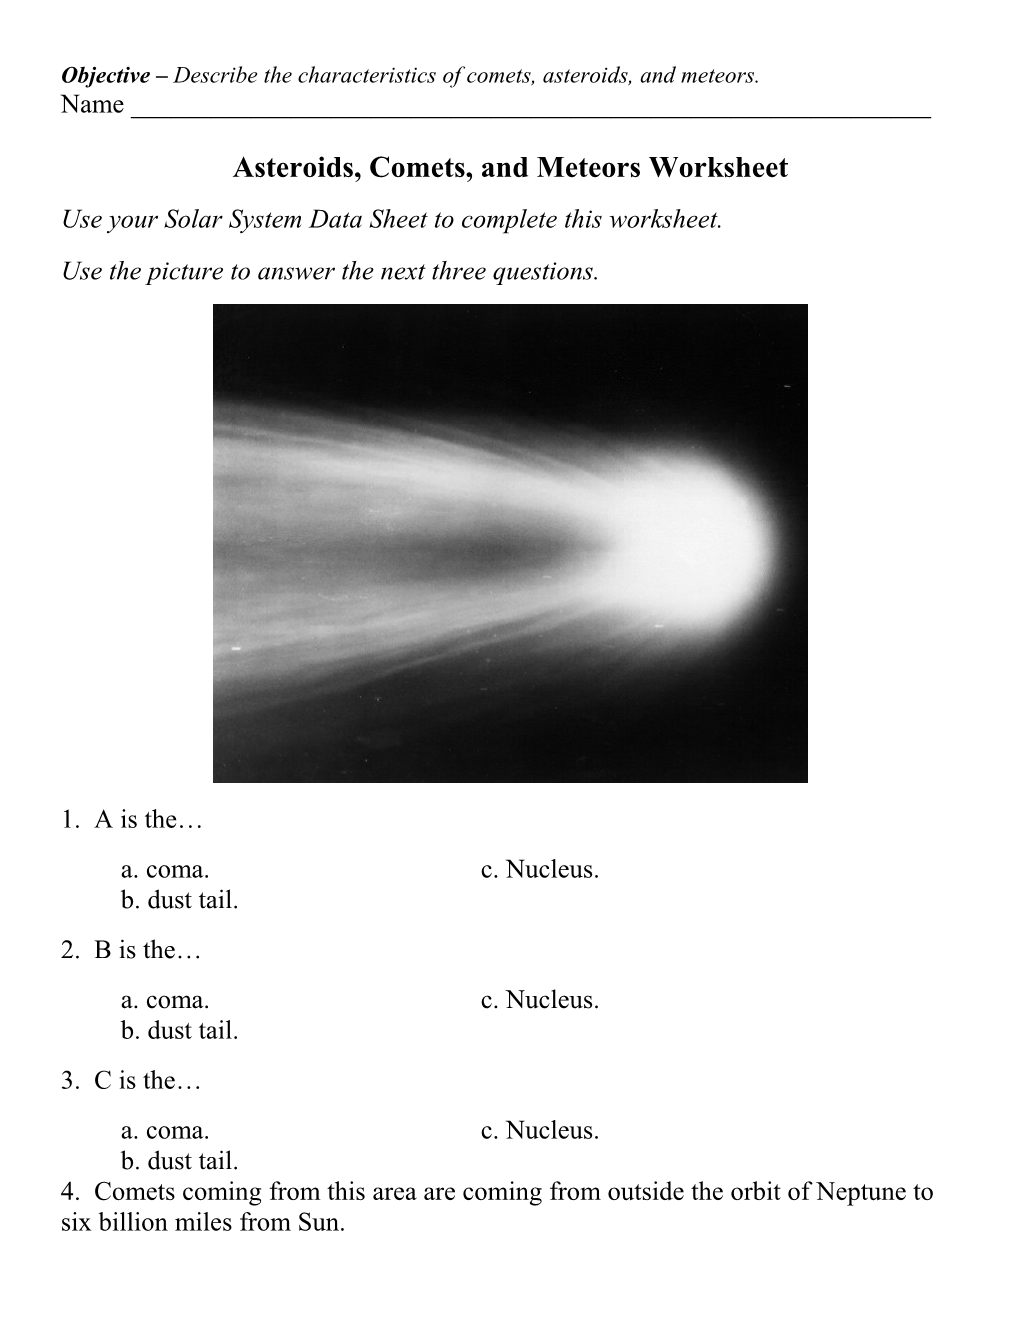 Asteroids, Comets, and Meteors Worksheet